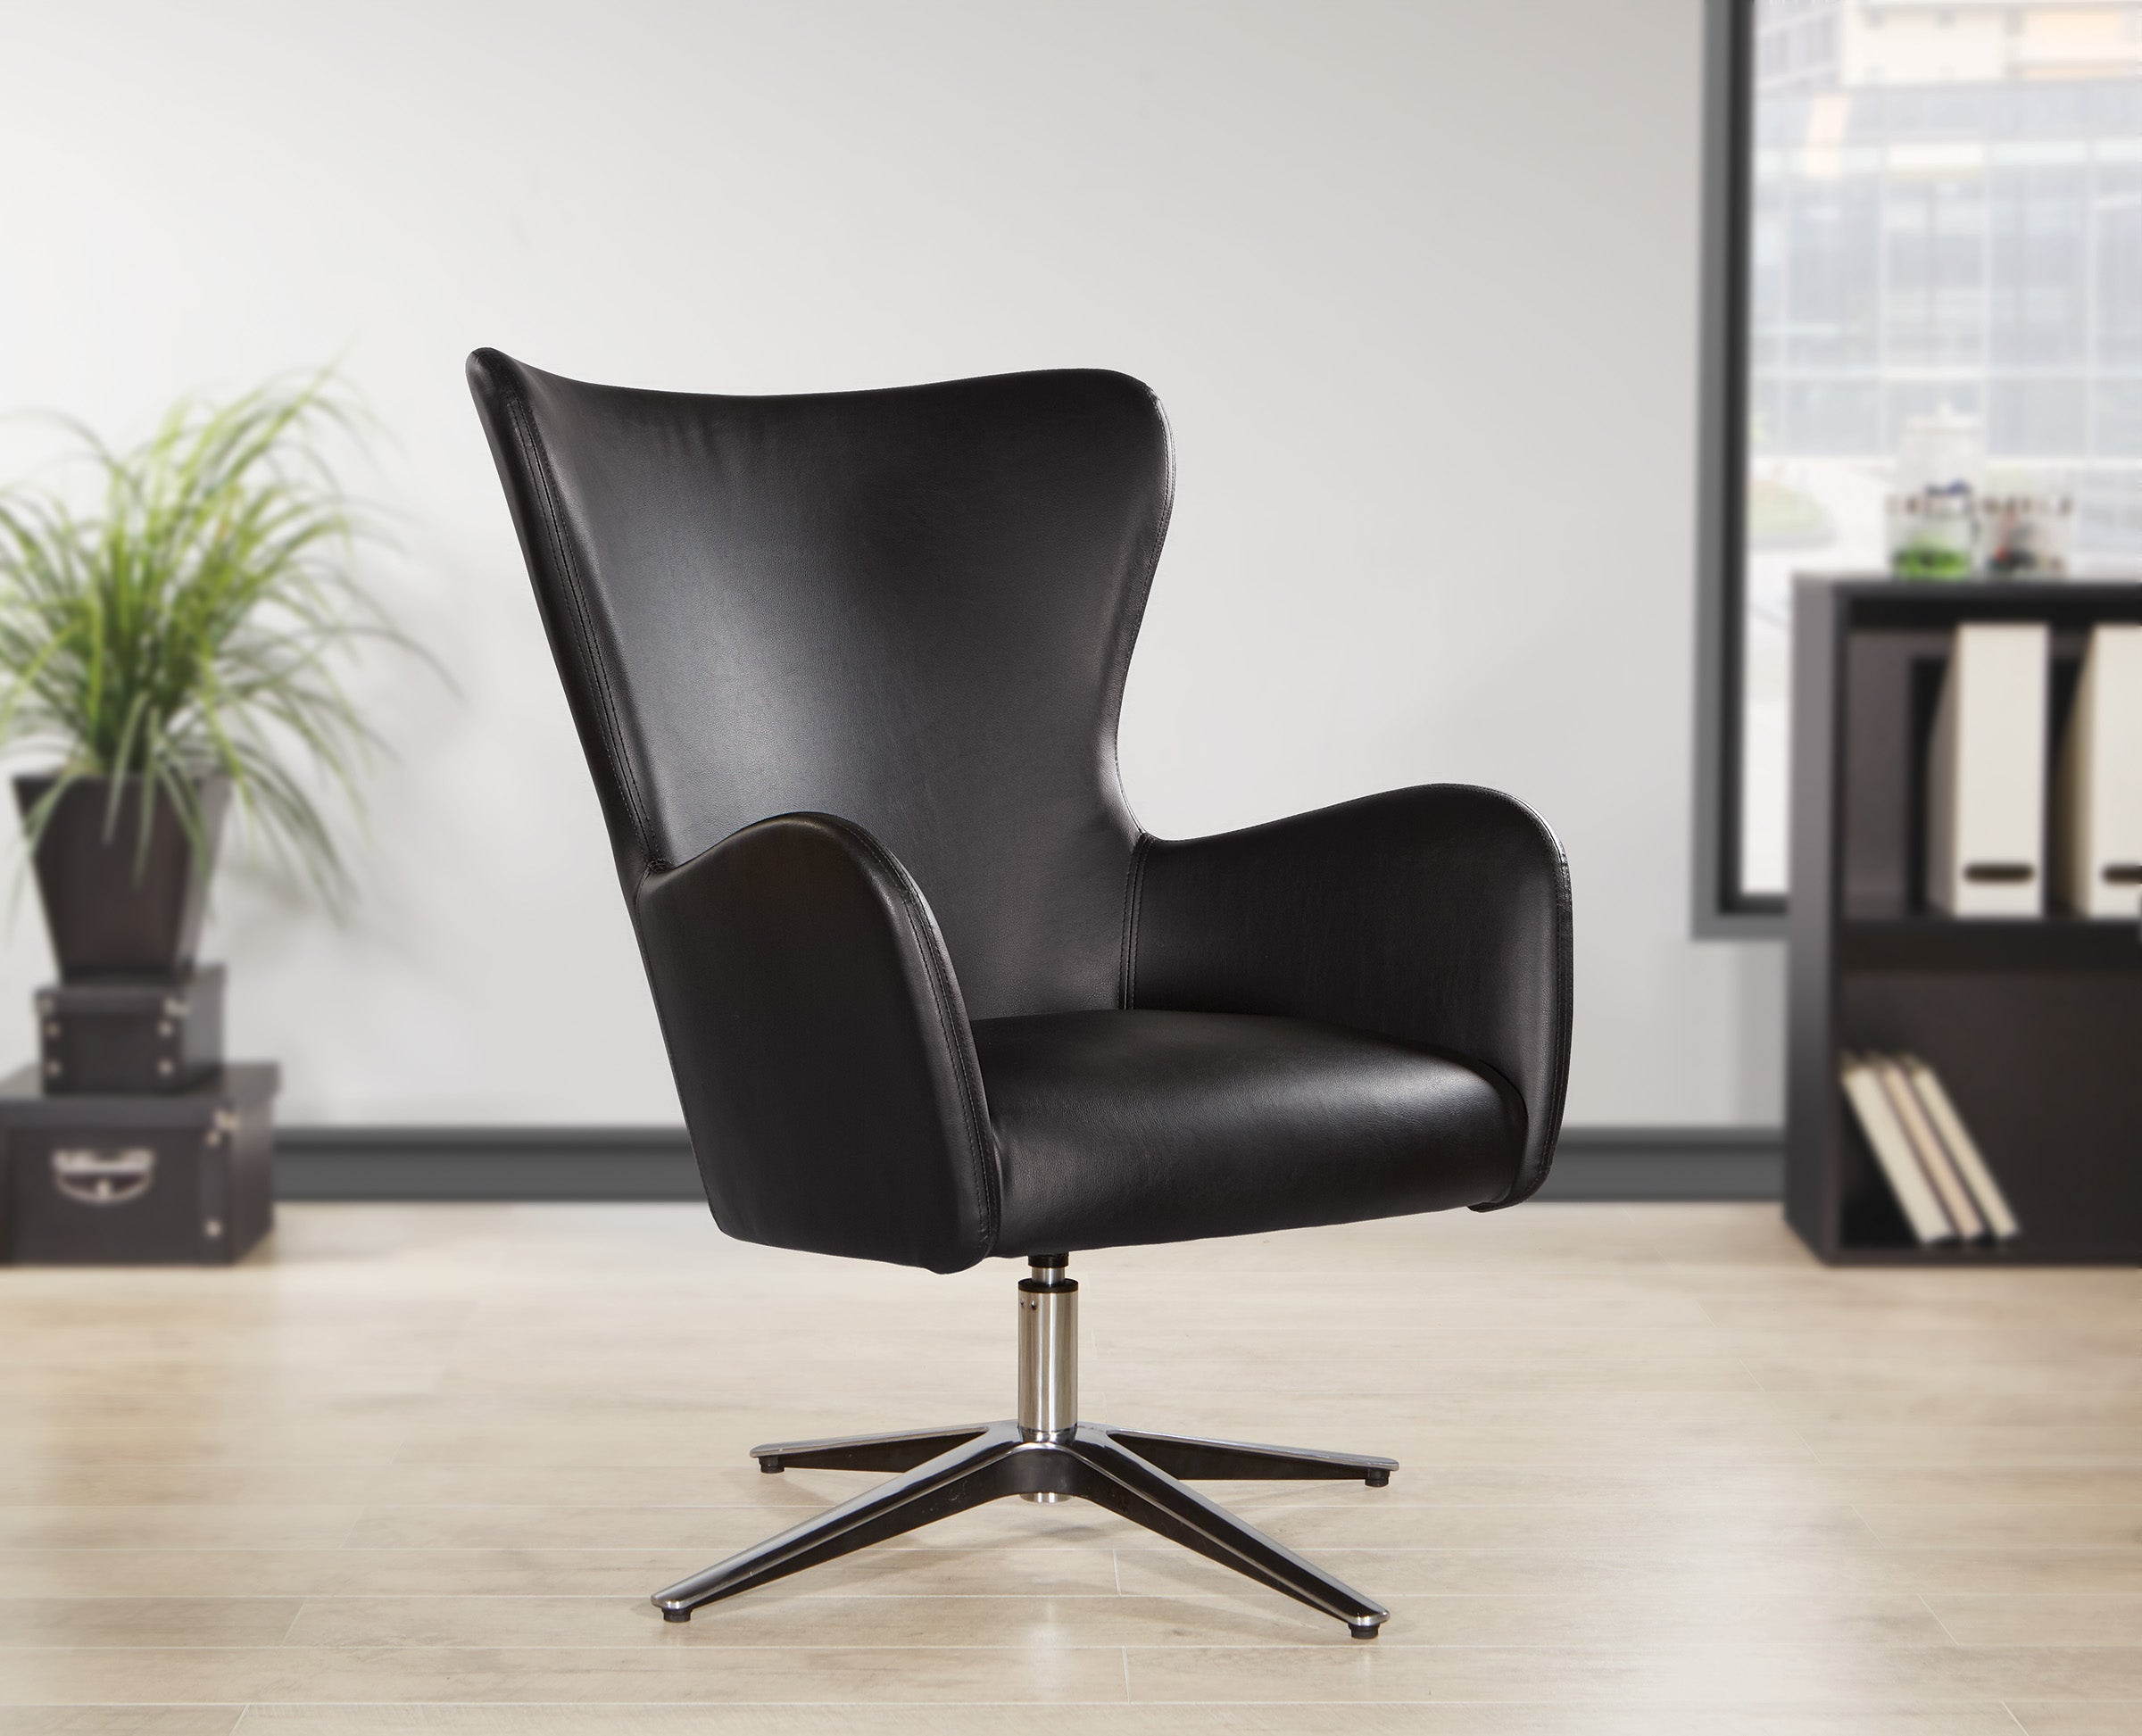 LS5387AL - Modern Oversized Swivel Lounge Chair with Aluminum Base by OSP